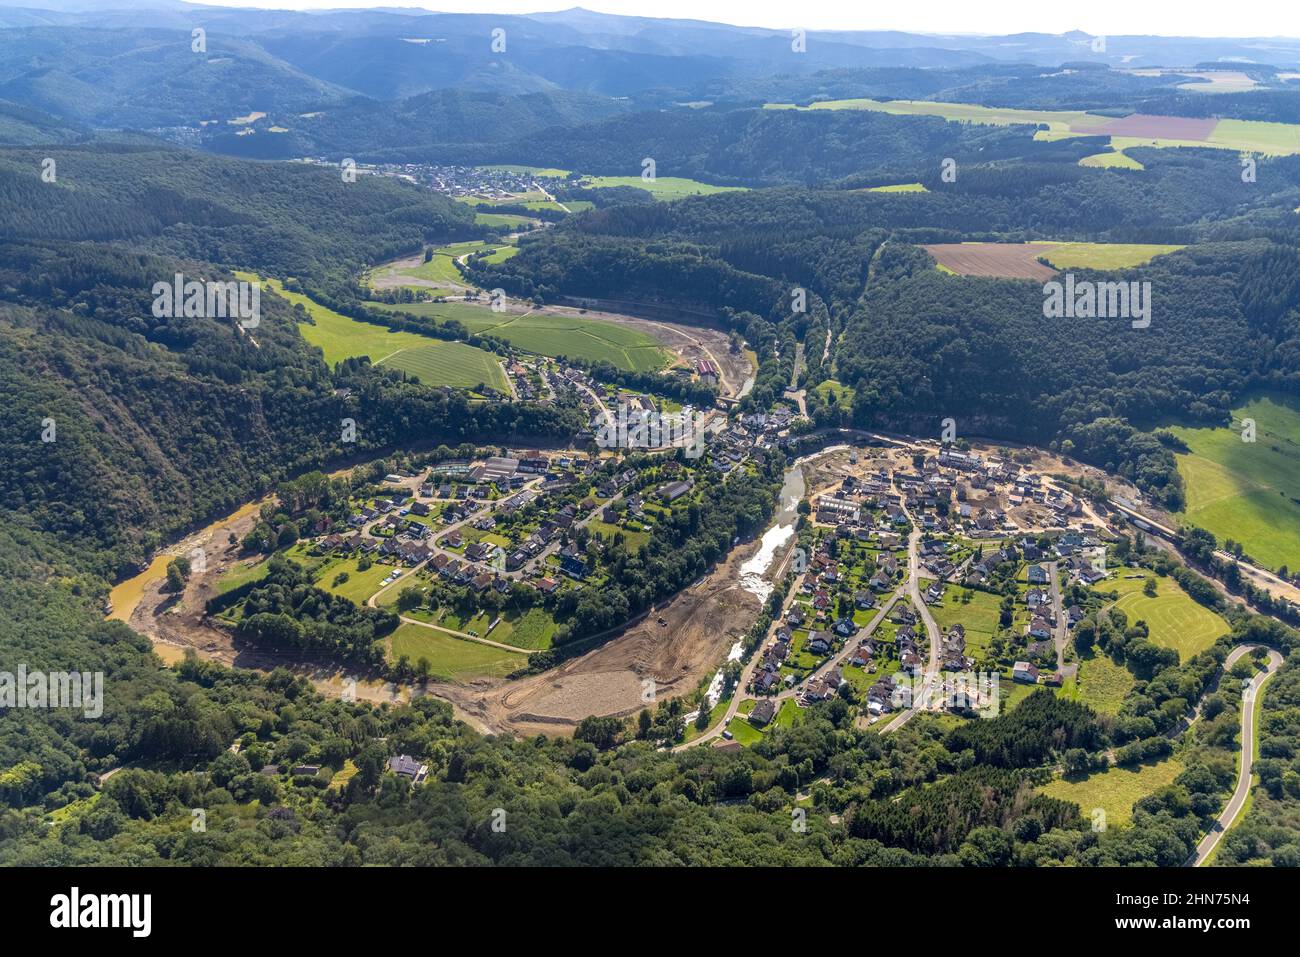 Aerial photograph, flooded area with river Ahr in Schuld, Ahr flood, Ahr valley, Rhineland-Palatinate, Germany, Ahr flood, DE, Europe, flood disaster, Stock Photo